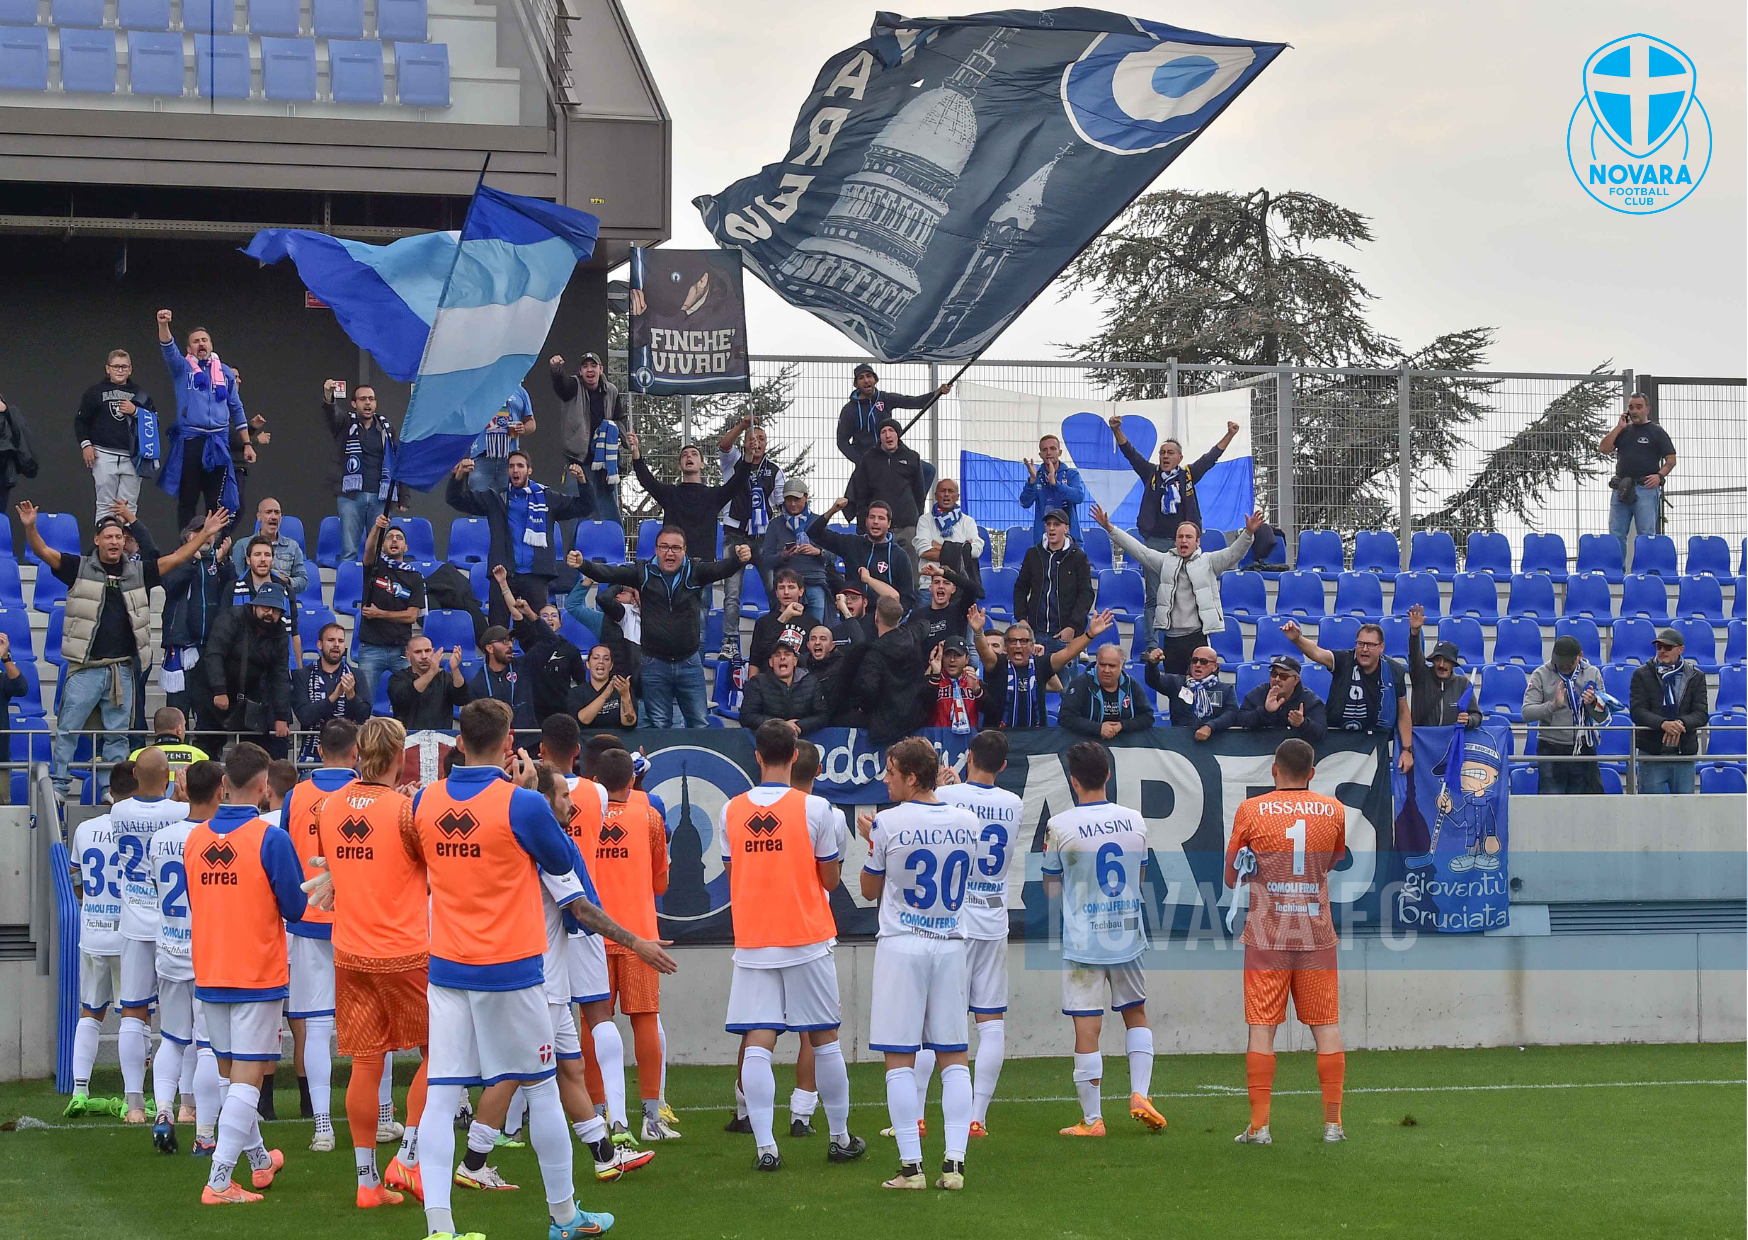 Read more about the article Albinoleffe-Novara 3-1 | Gallery